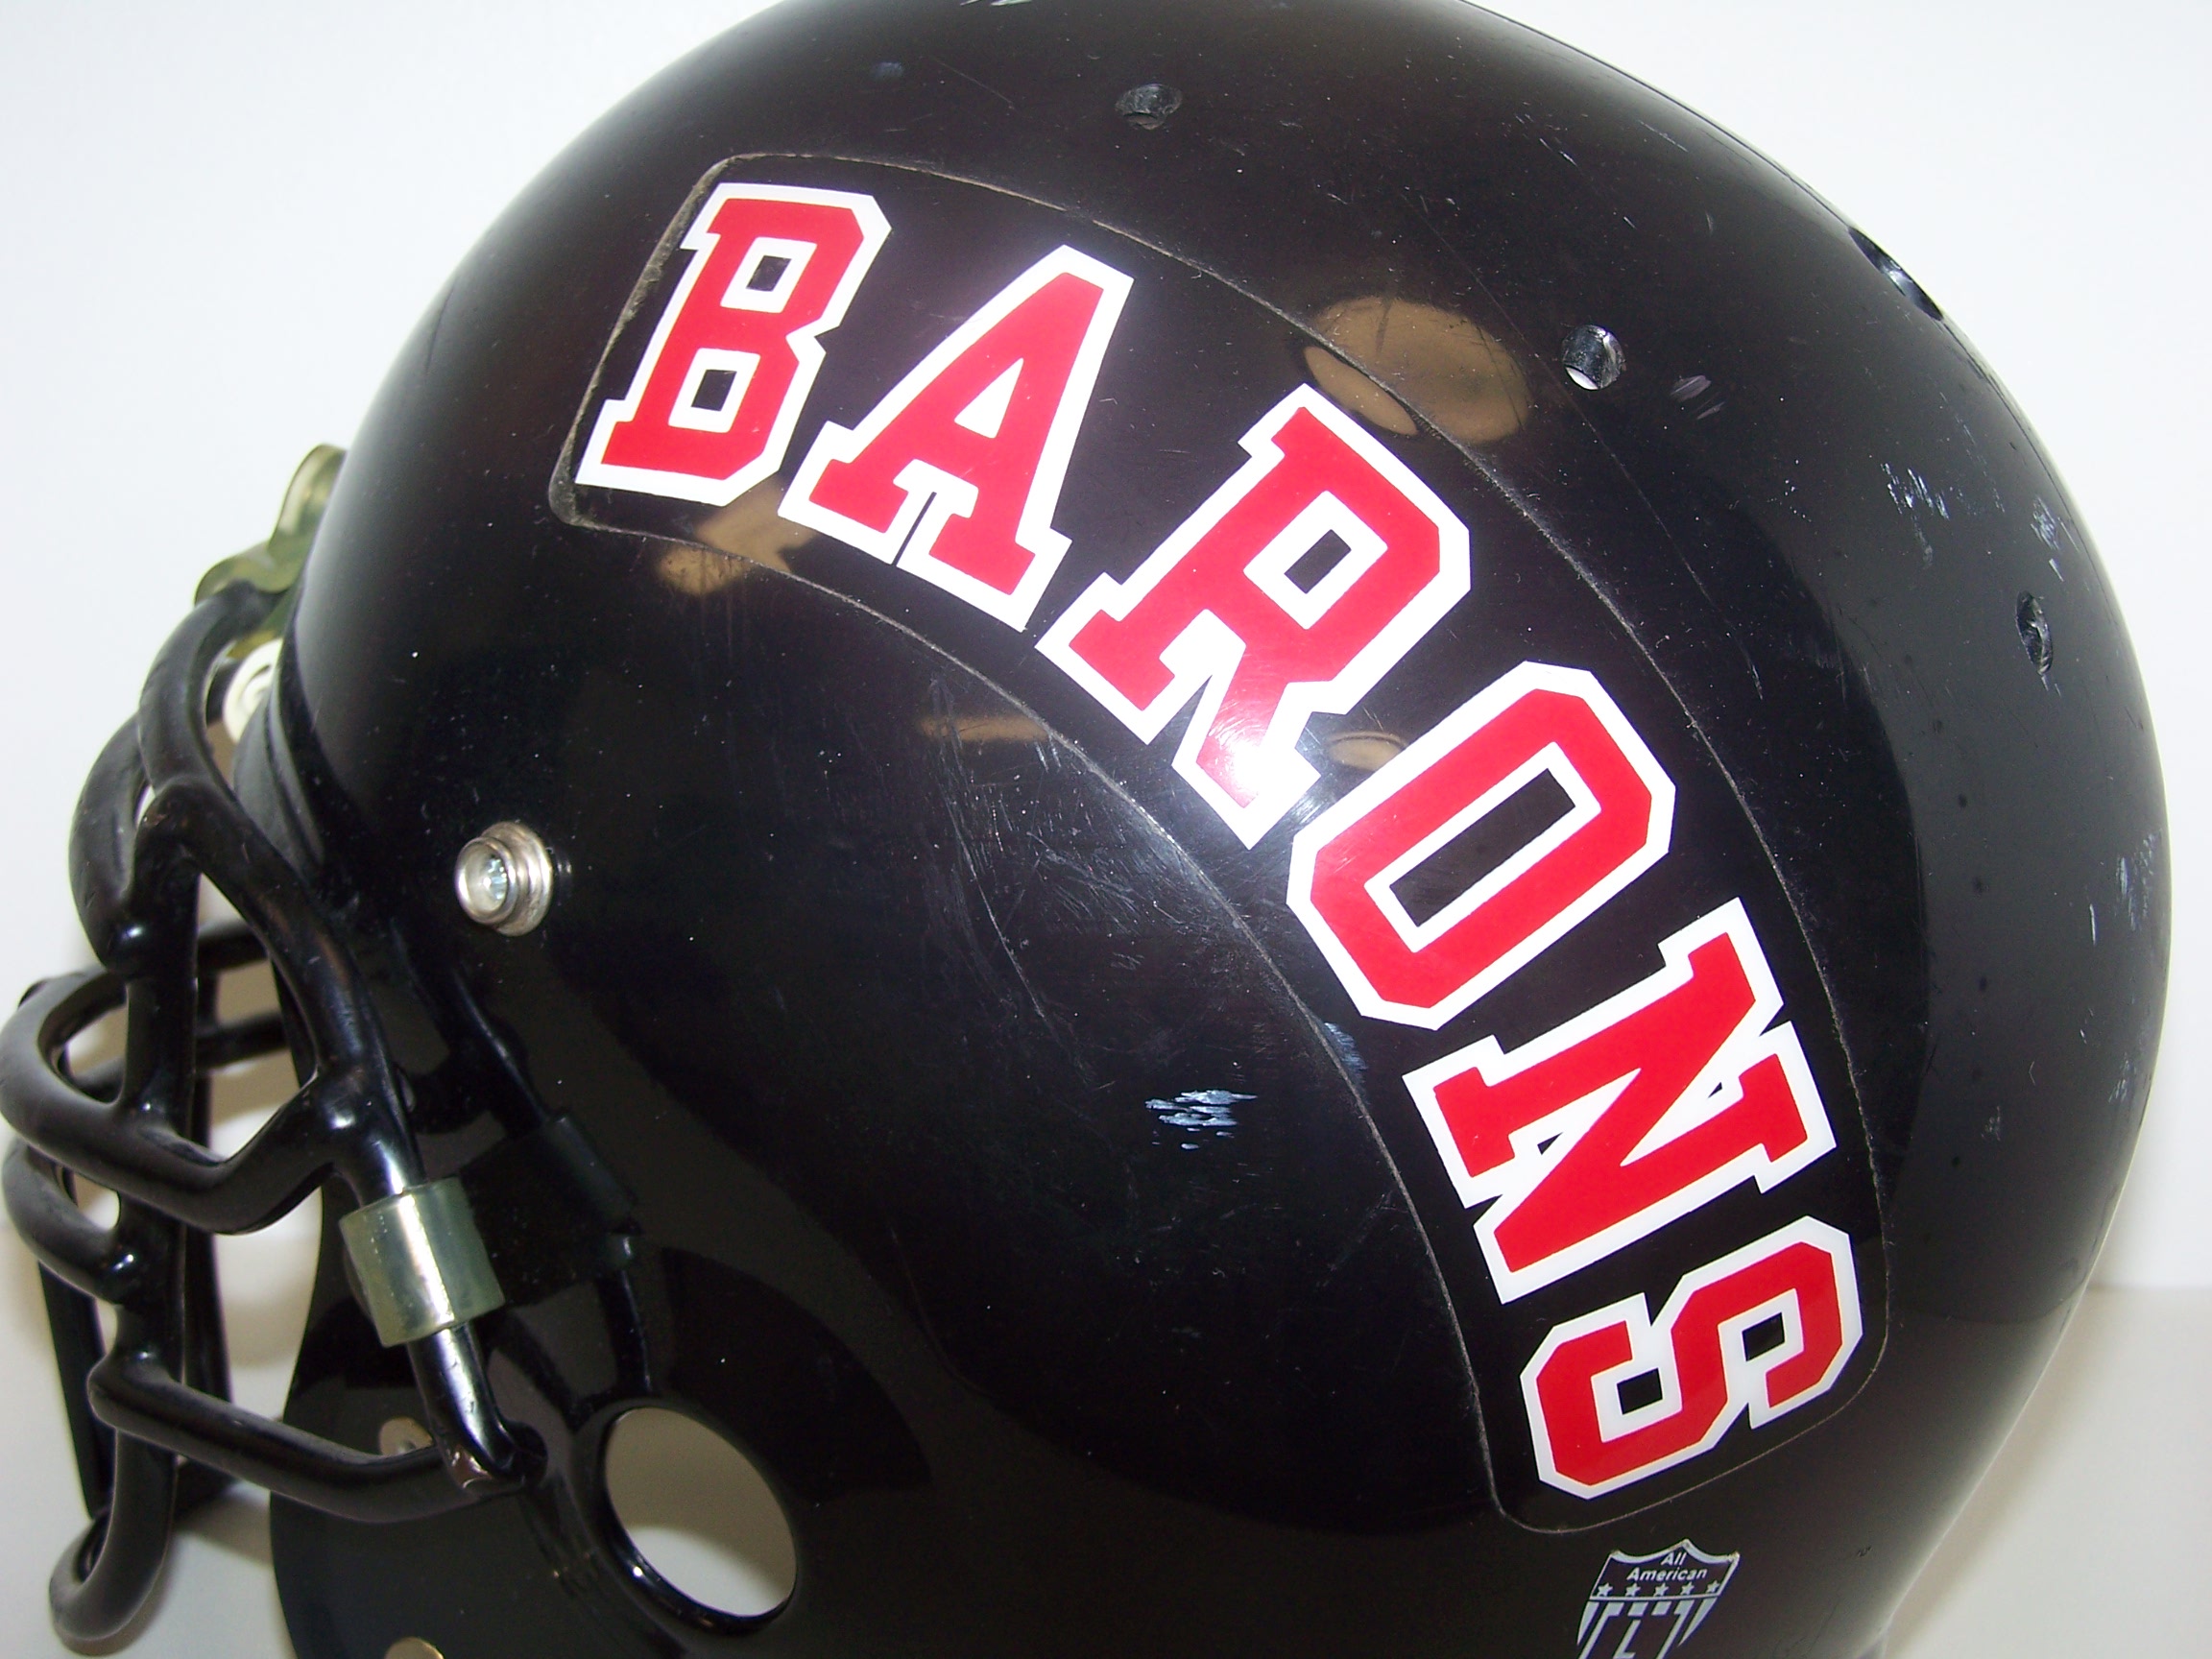 Barons Looking For Third Win on Senior Night